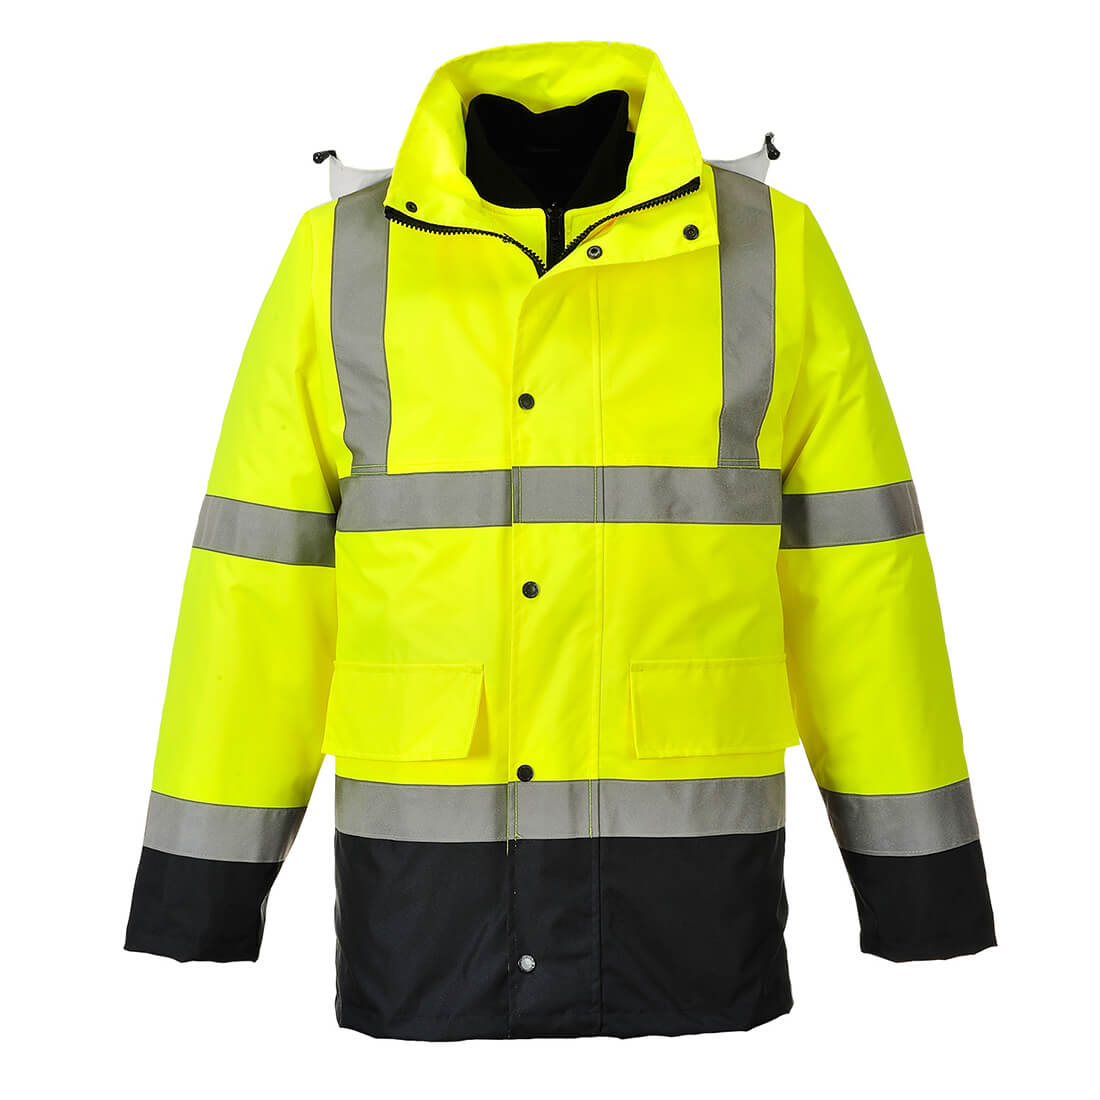 Image of Oxford Weave 300D Class 3 Hi Vis 4-in-1 Traffic Jacket Yellow / Navy M